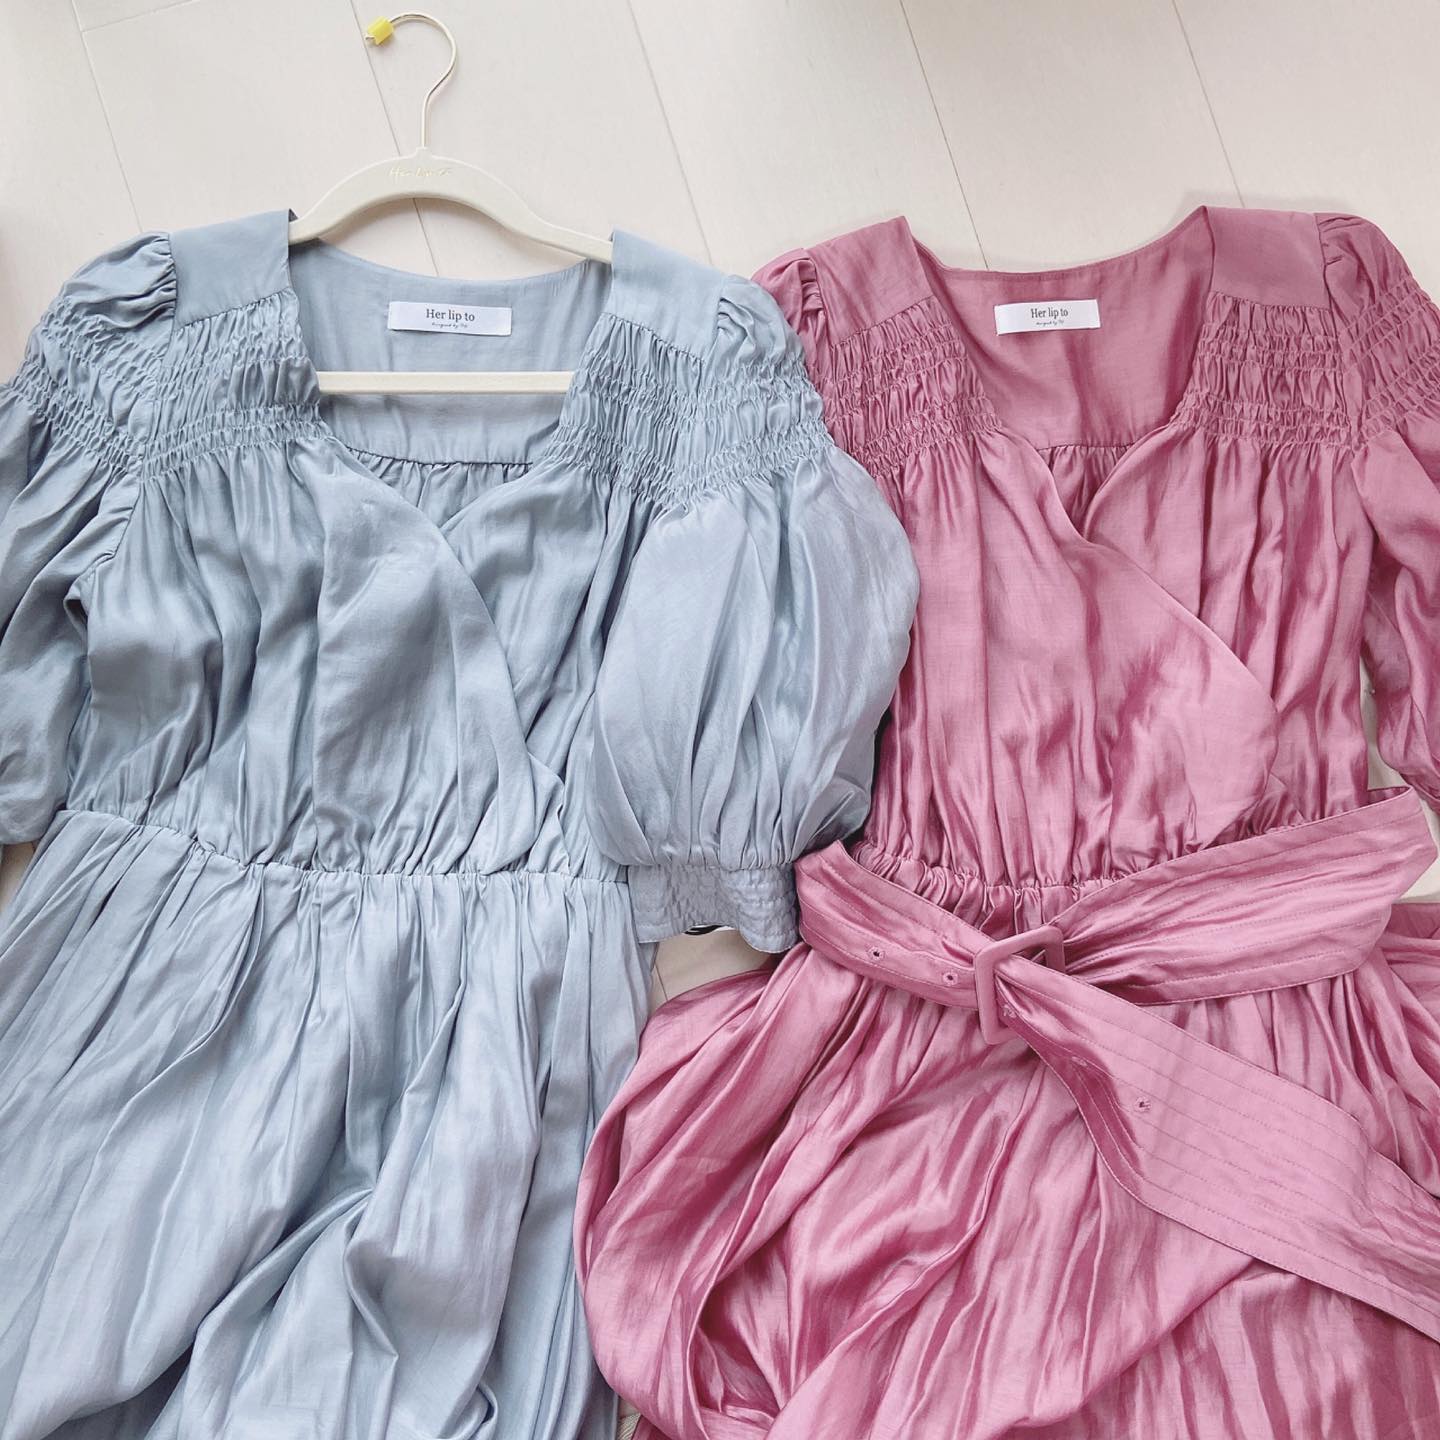 Her lip to Airy Volume Sleeve Dress rose